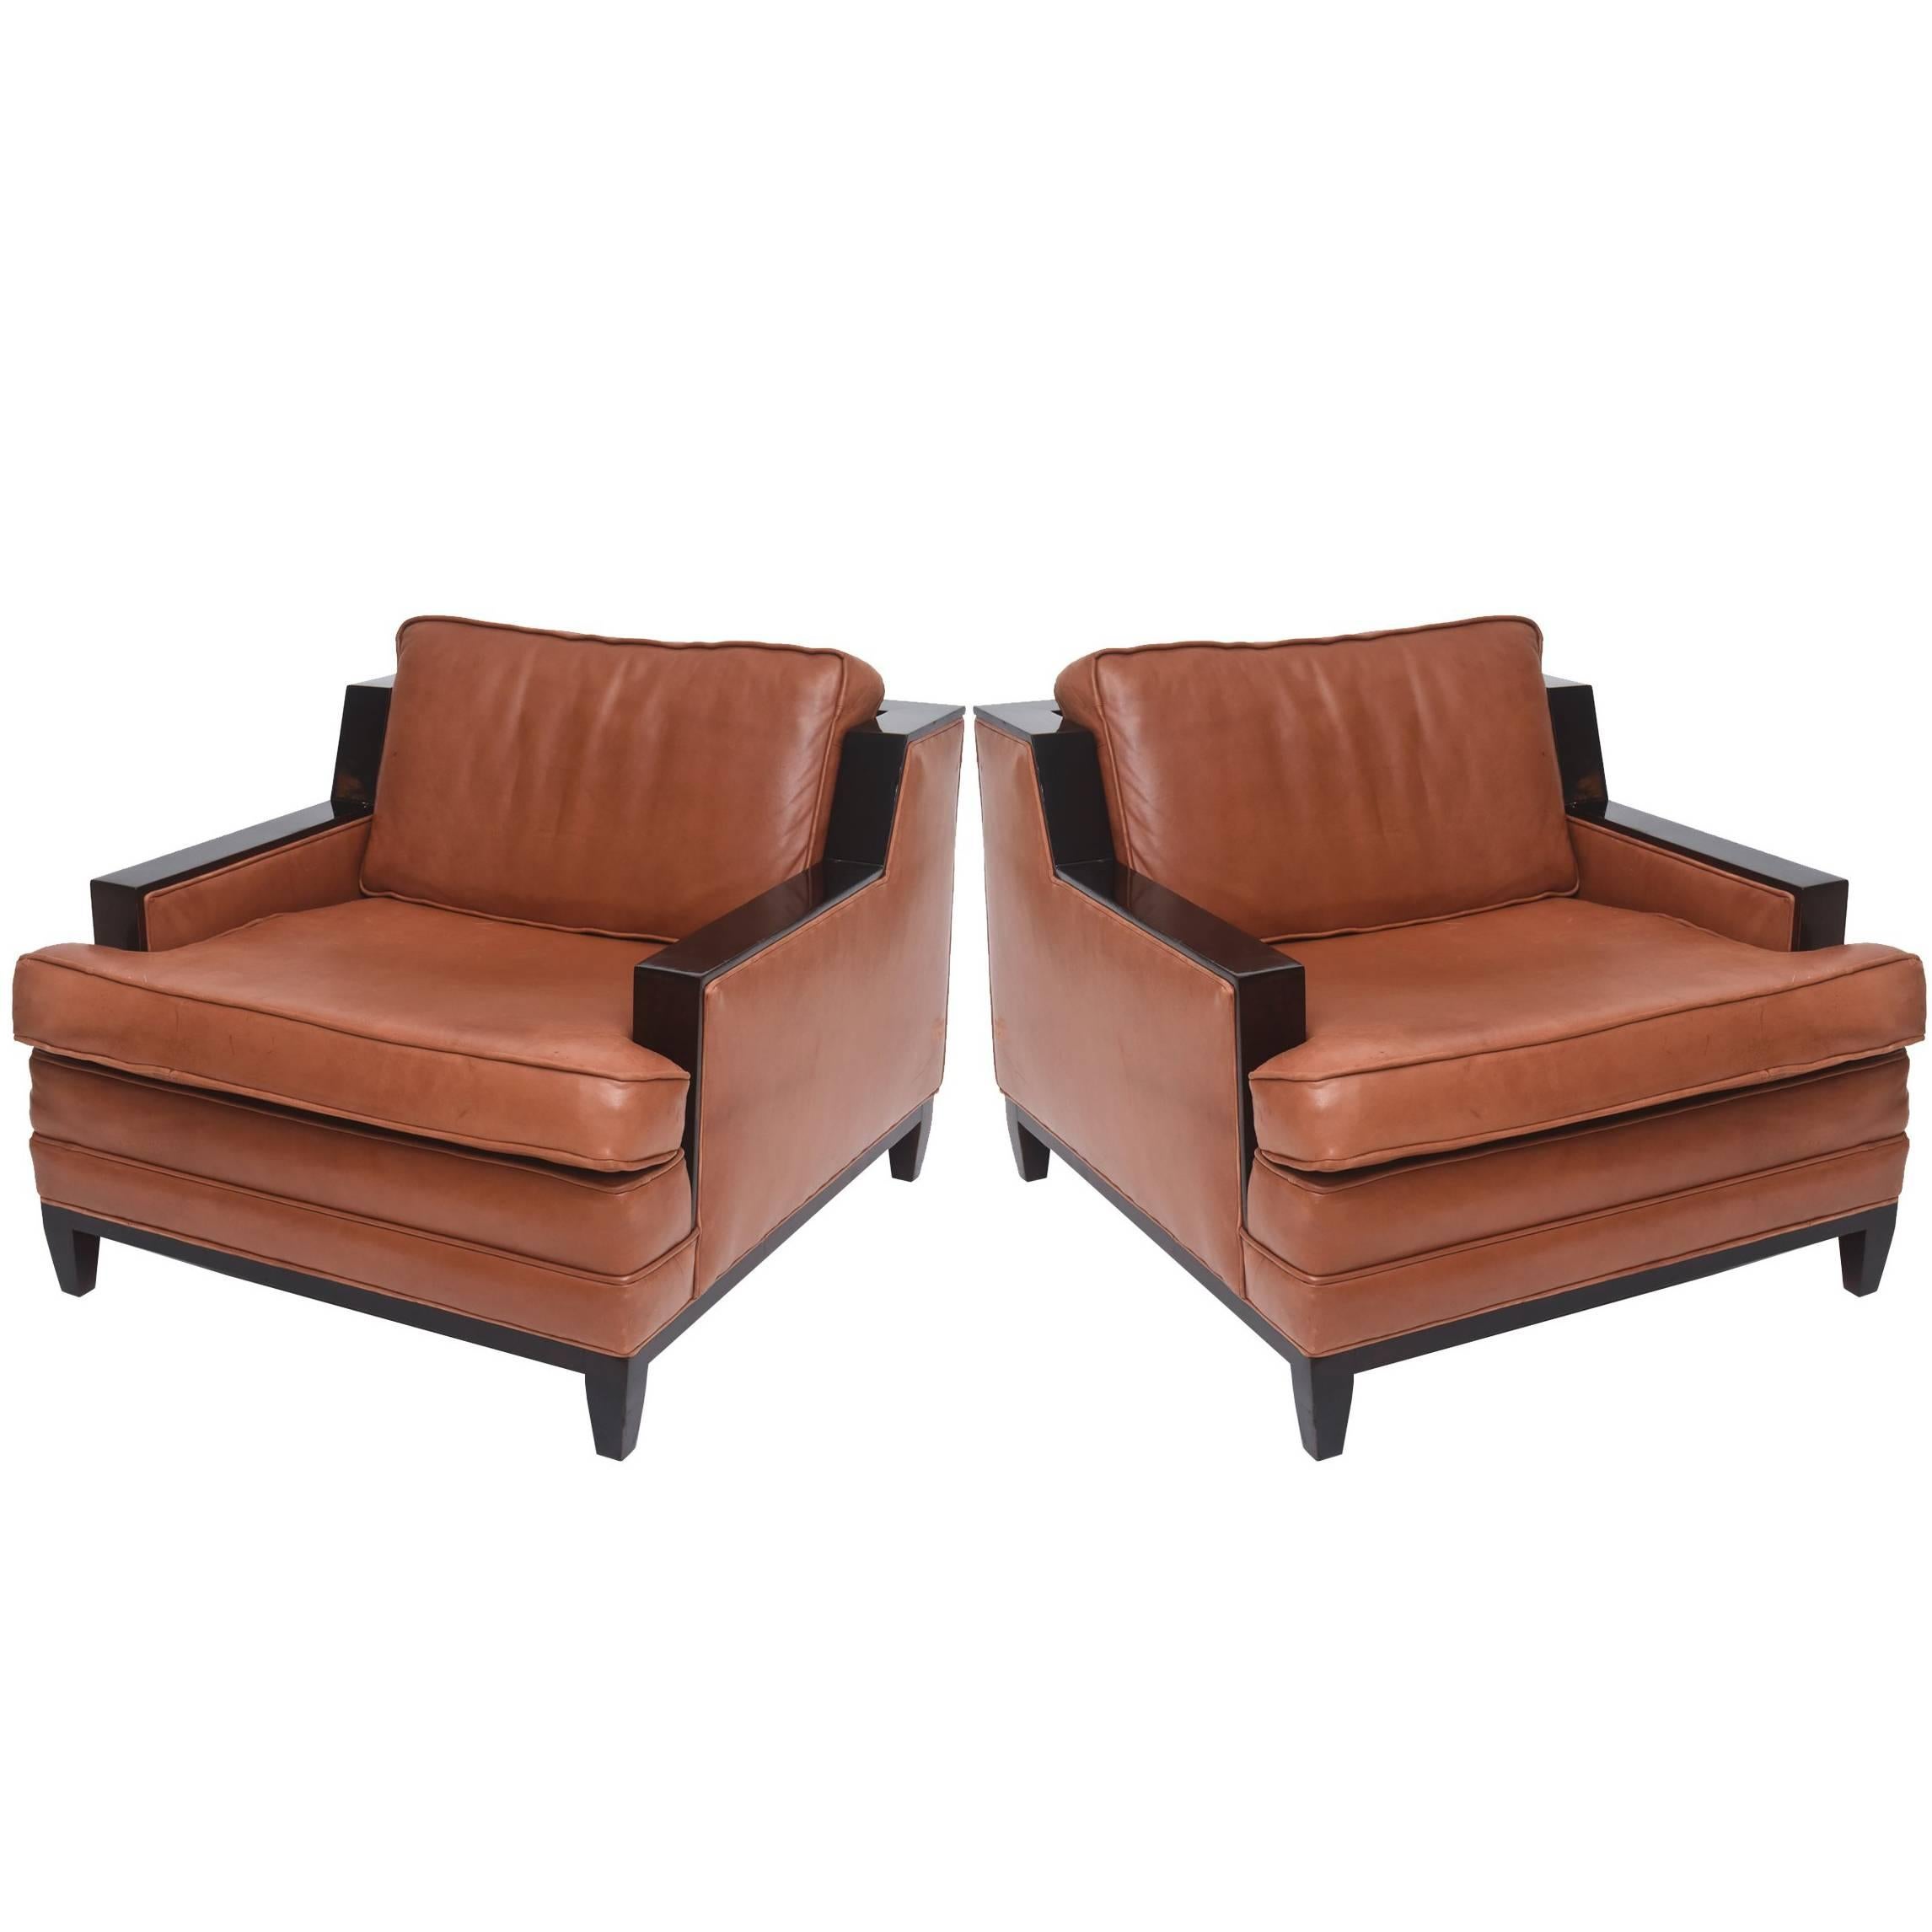 Pair of French Modern Leather Club Chairs Attributed to Jacques Adnet, 1940s